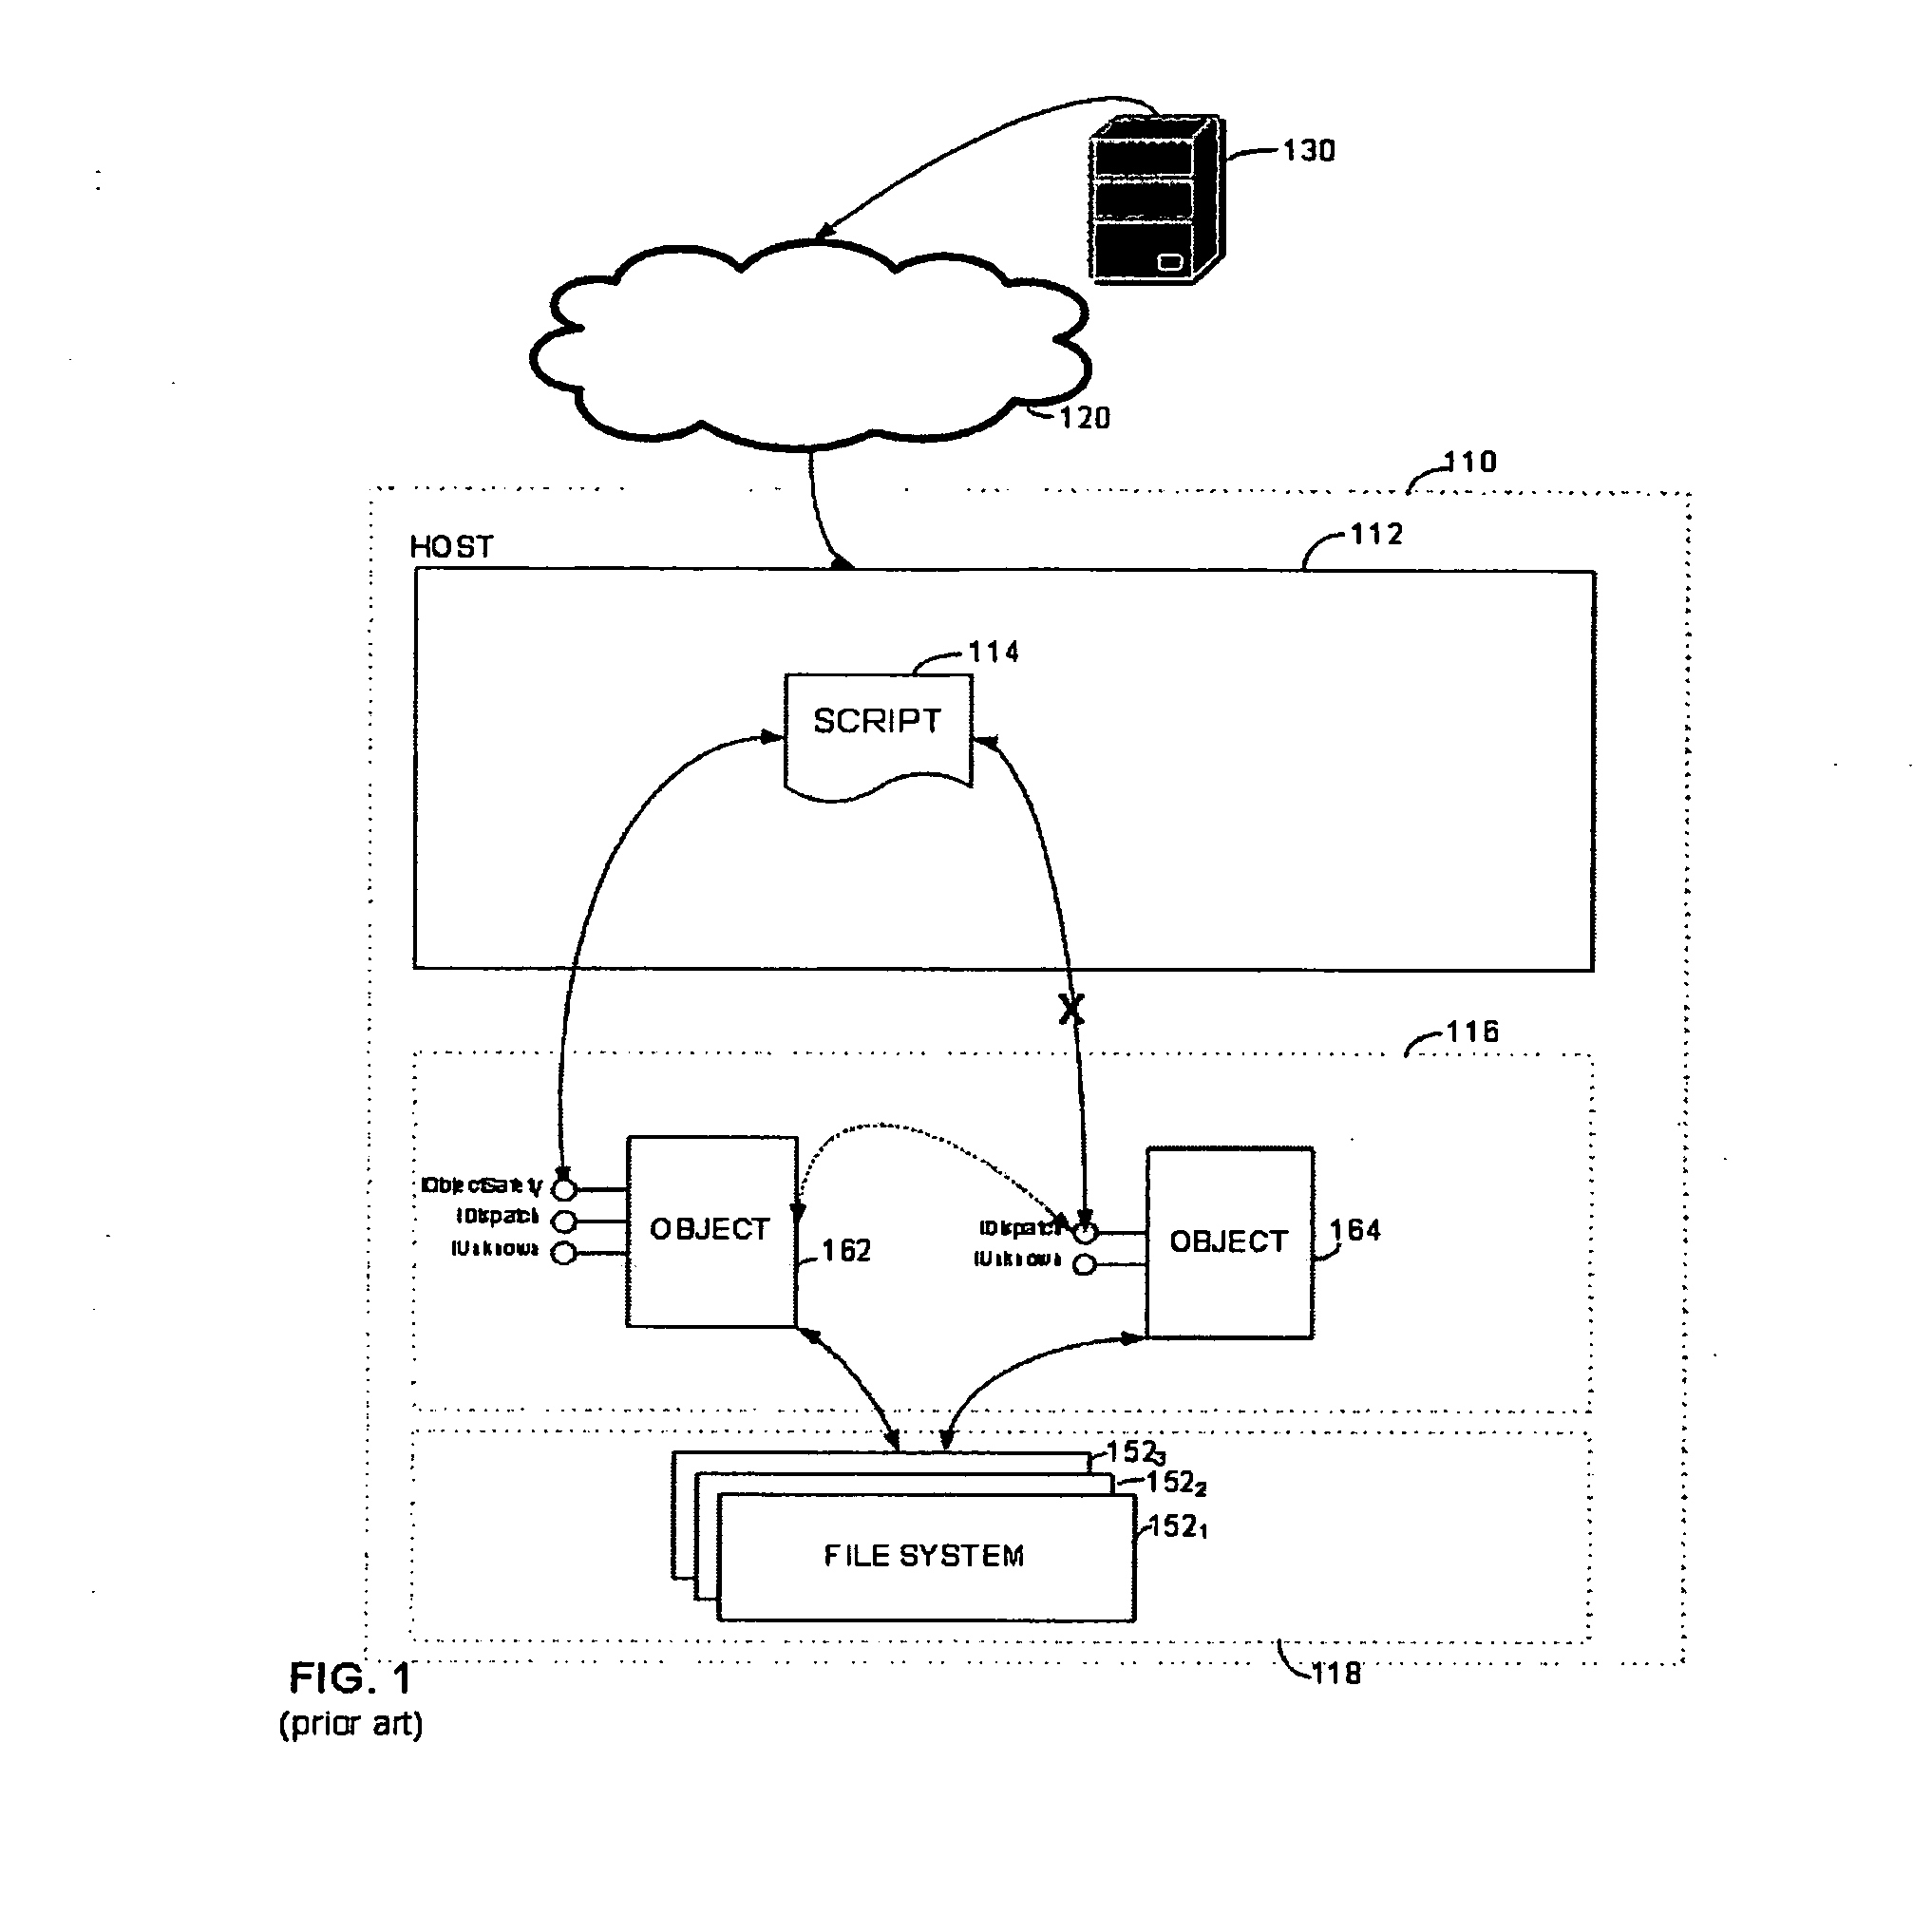 Software system with controlled access to objects